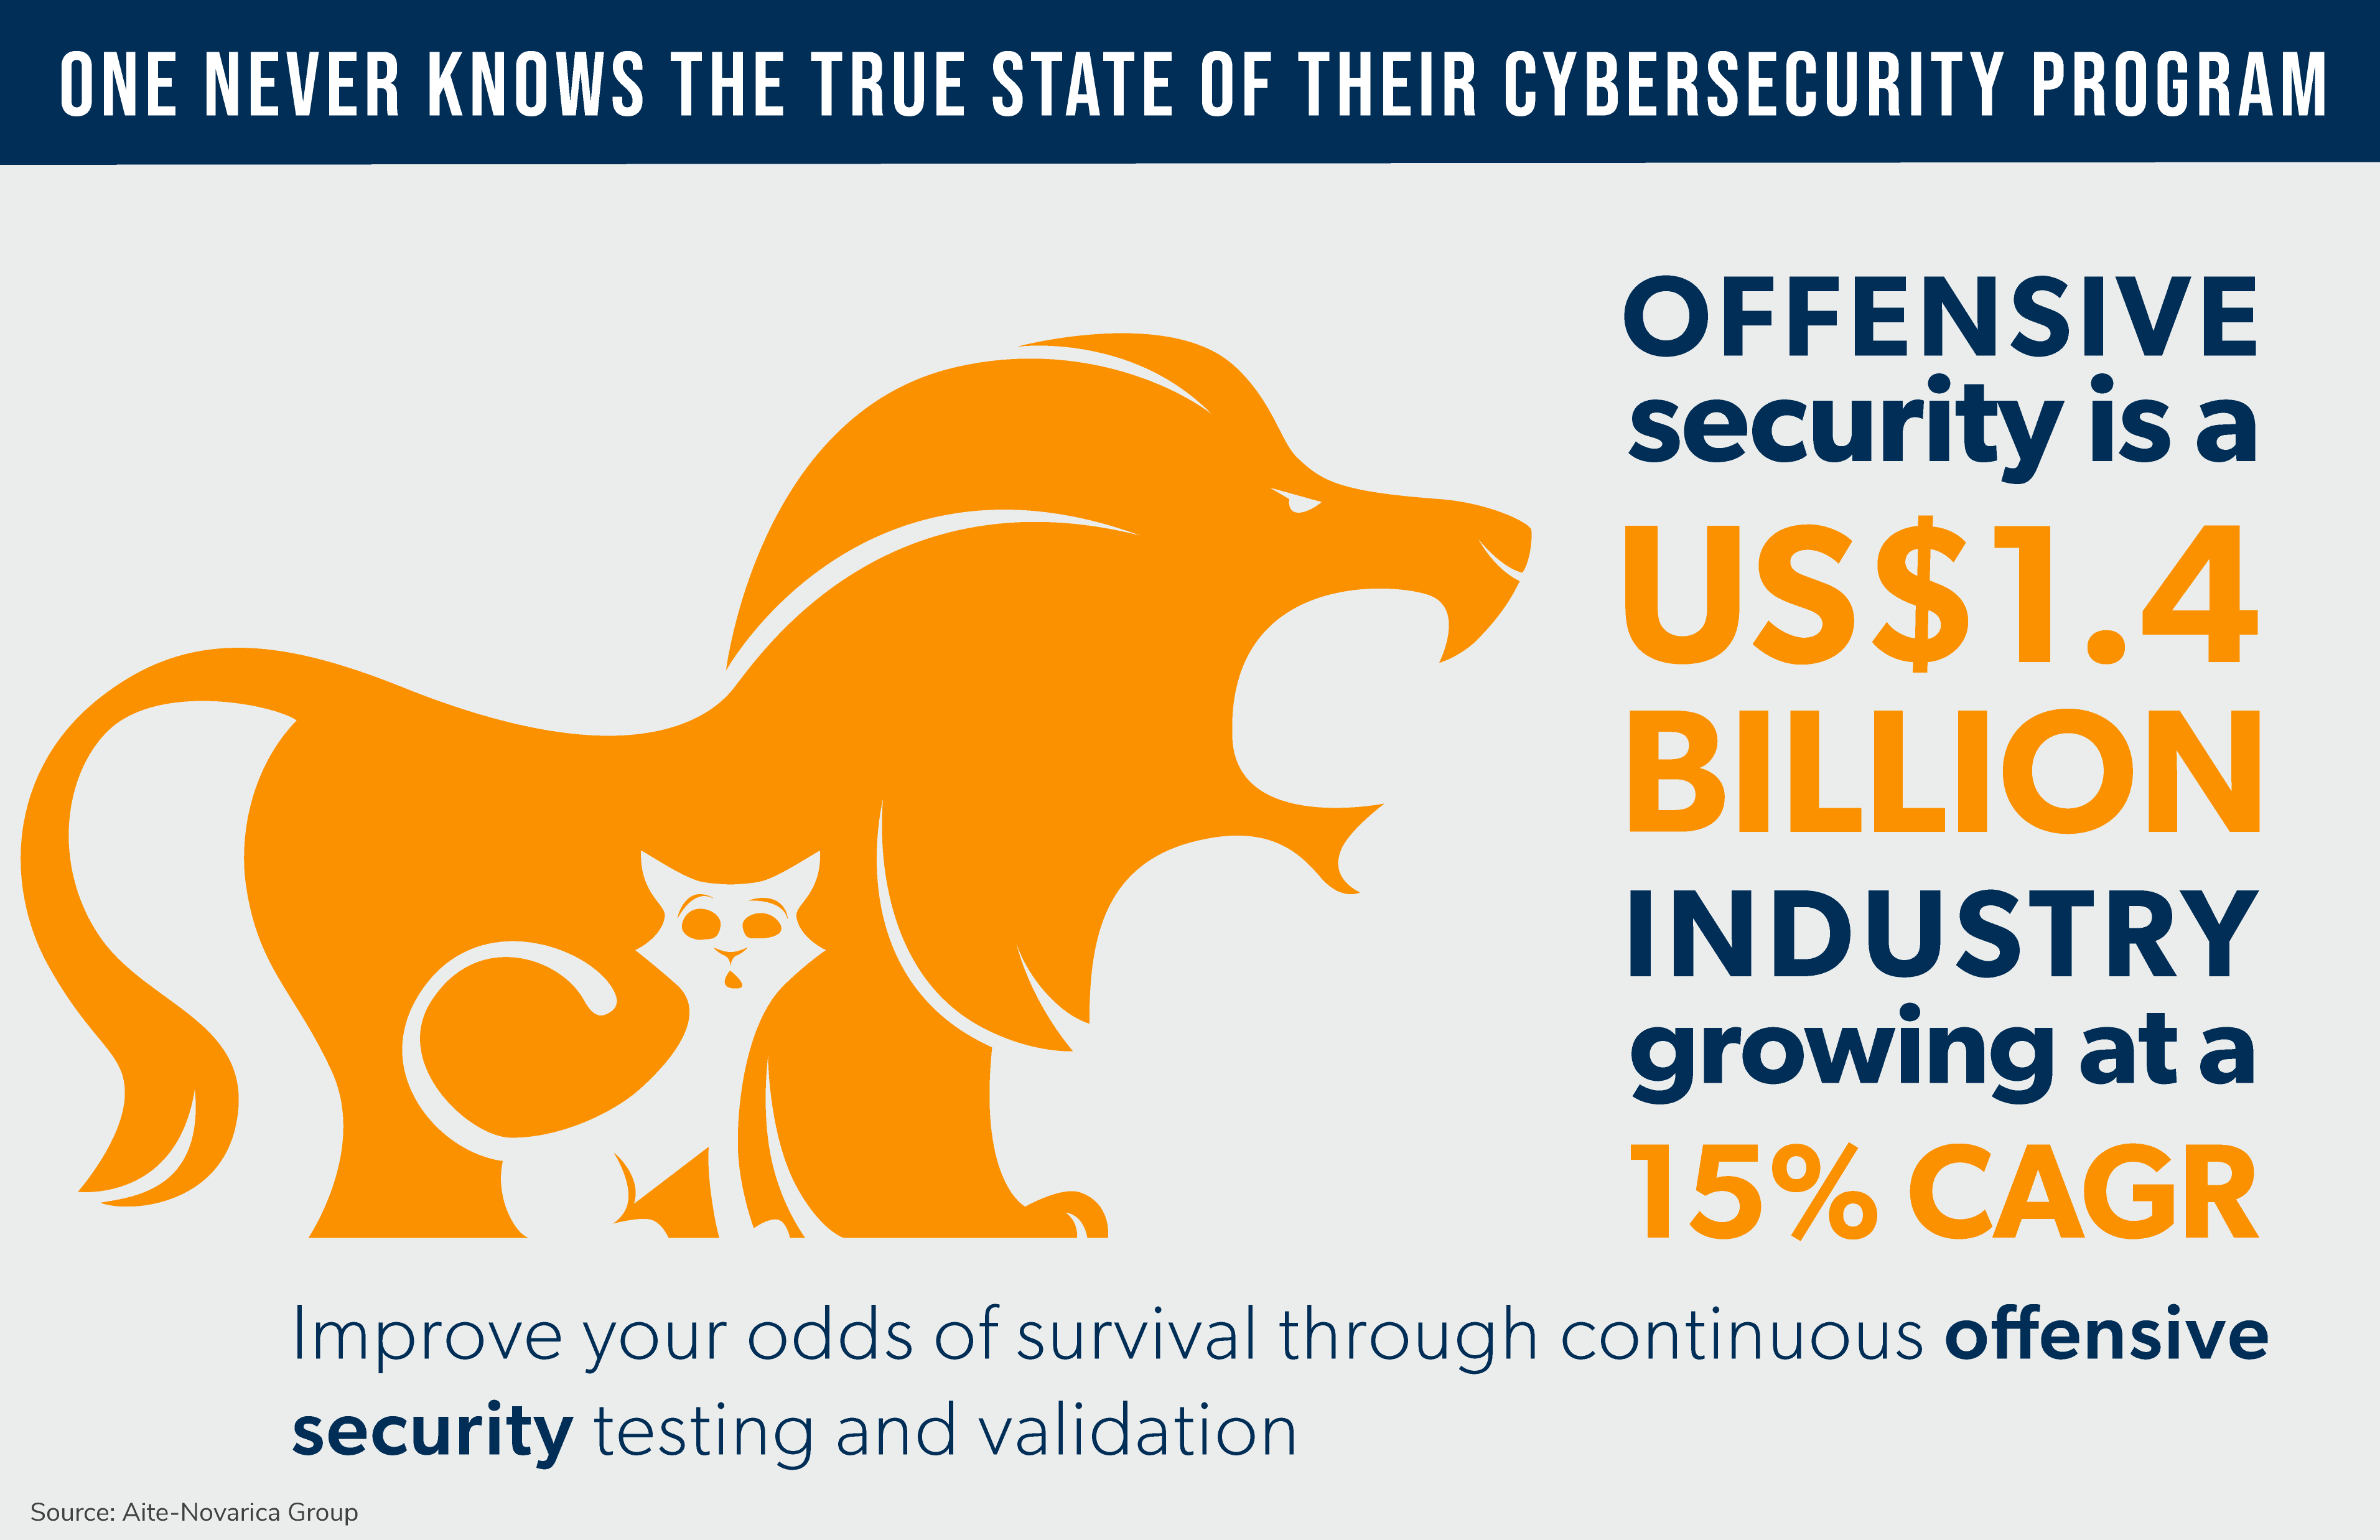 Offensive Security Industry Growing at 15% CAGR